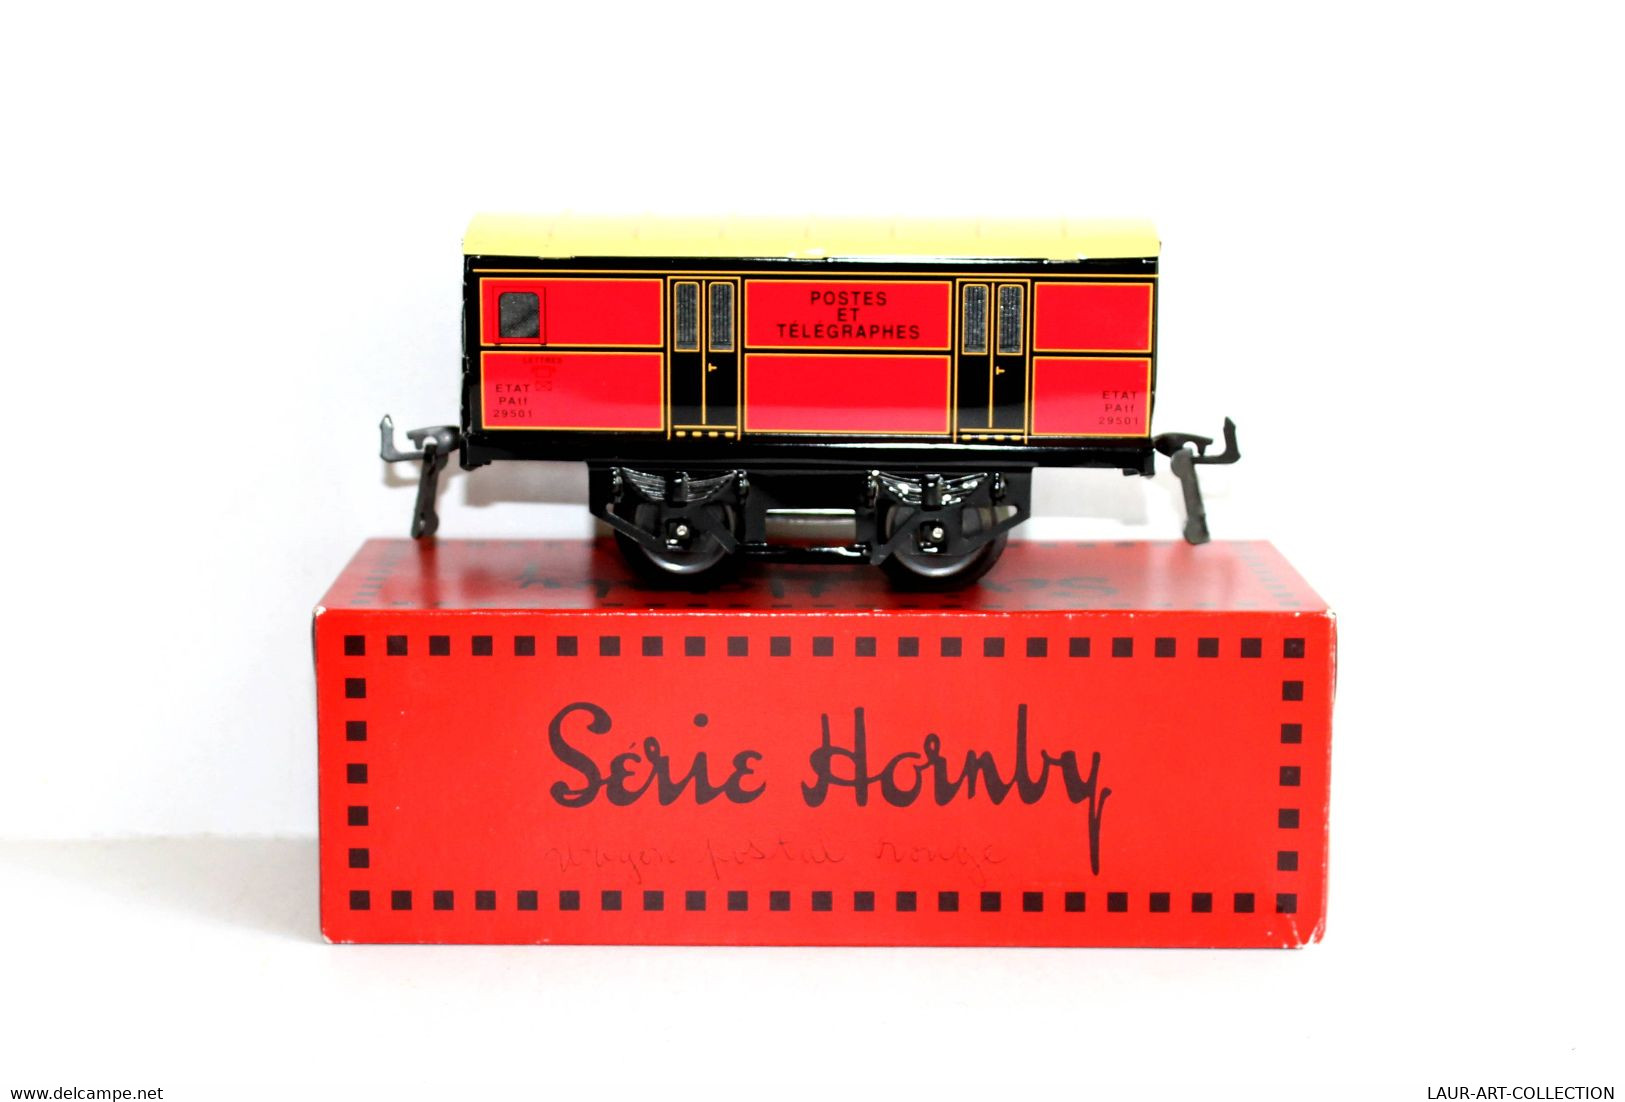 SERIE HORNBY - WAGON MARCHANDISE - ECH O N°402385S - POSTES ET TELEGRAPHES 29501 / FERROVIAIRE TRAIN CHEMIN FER (2105.19 - Wagons Voor Passagiers